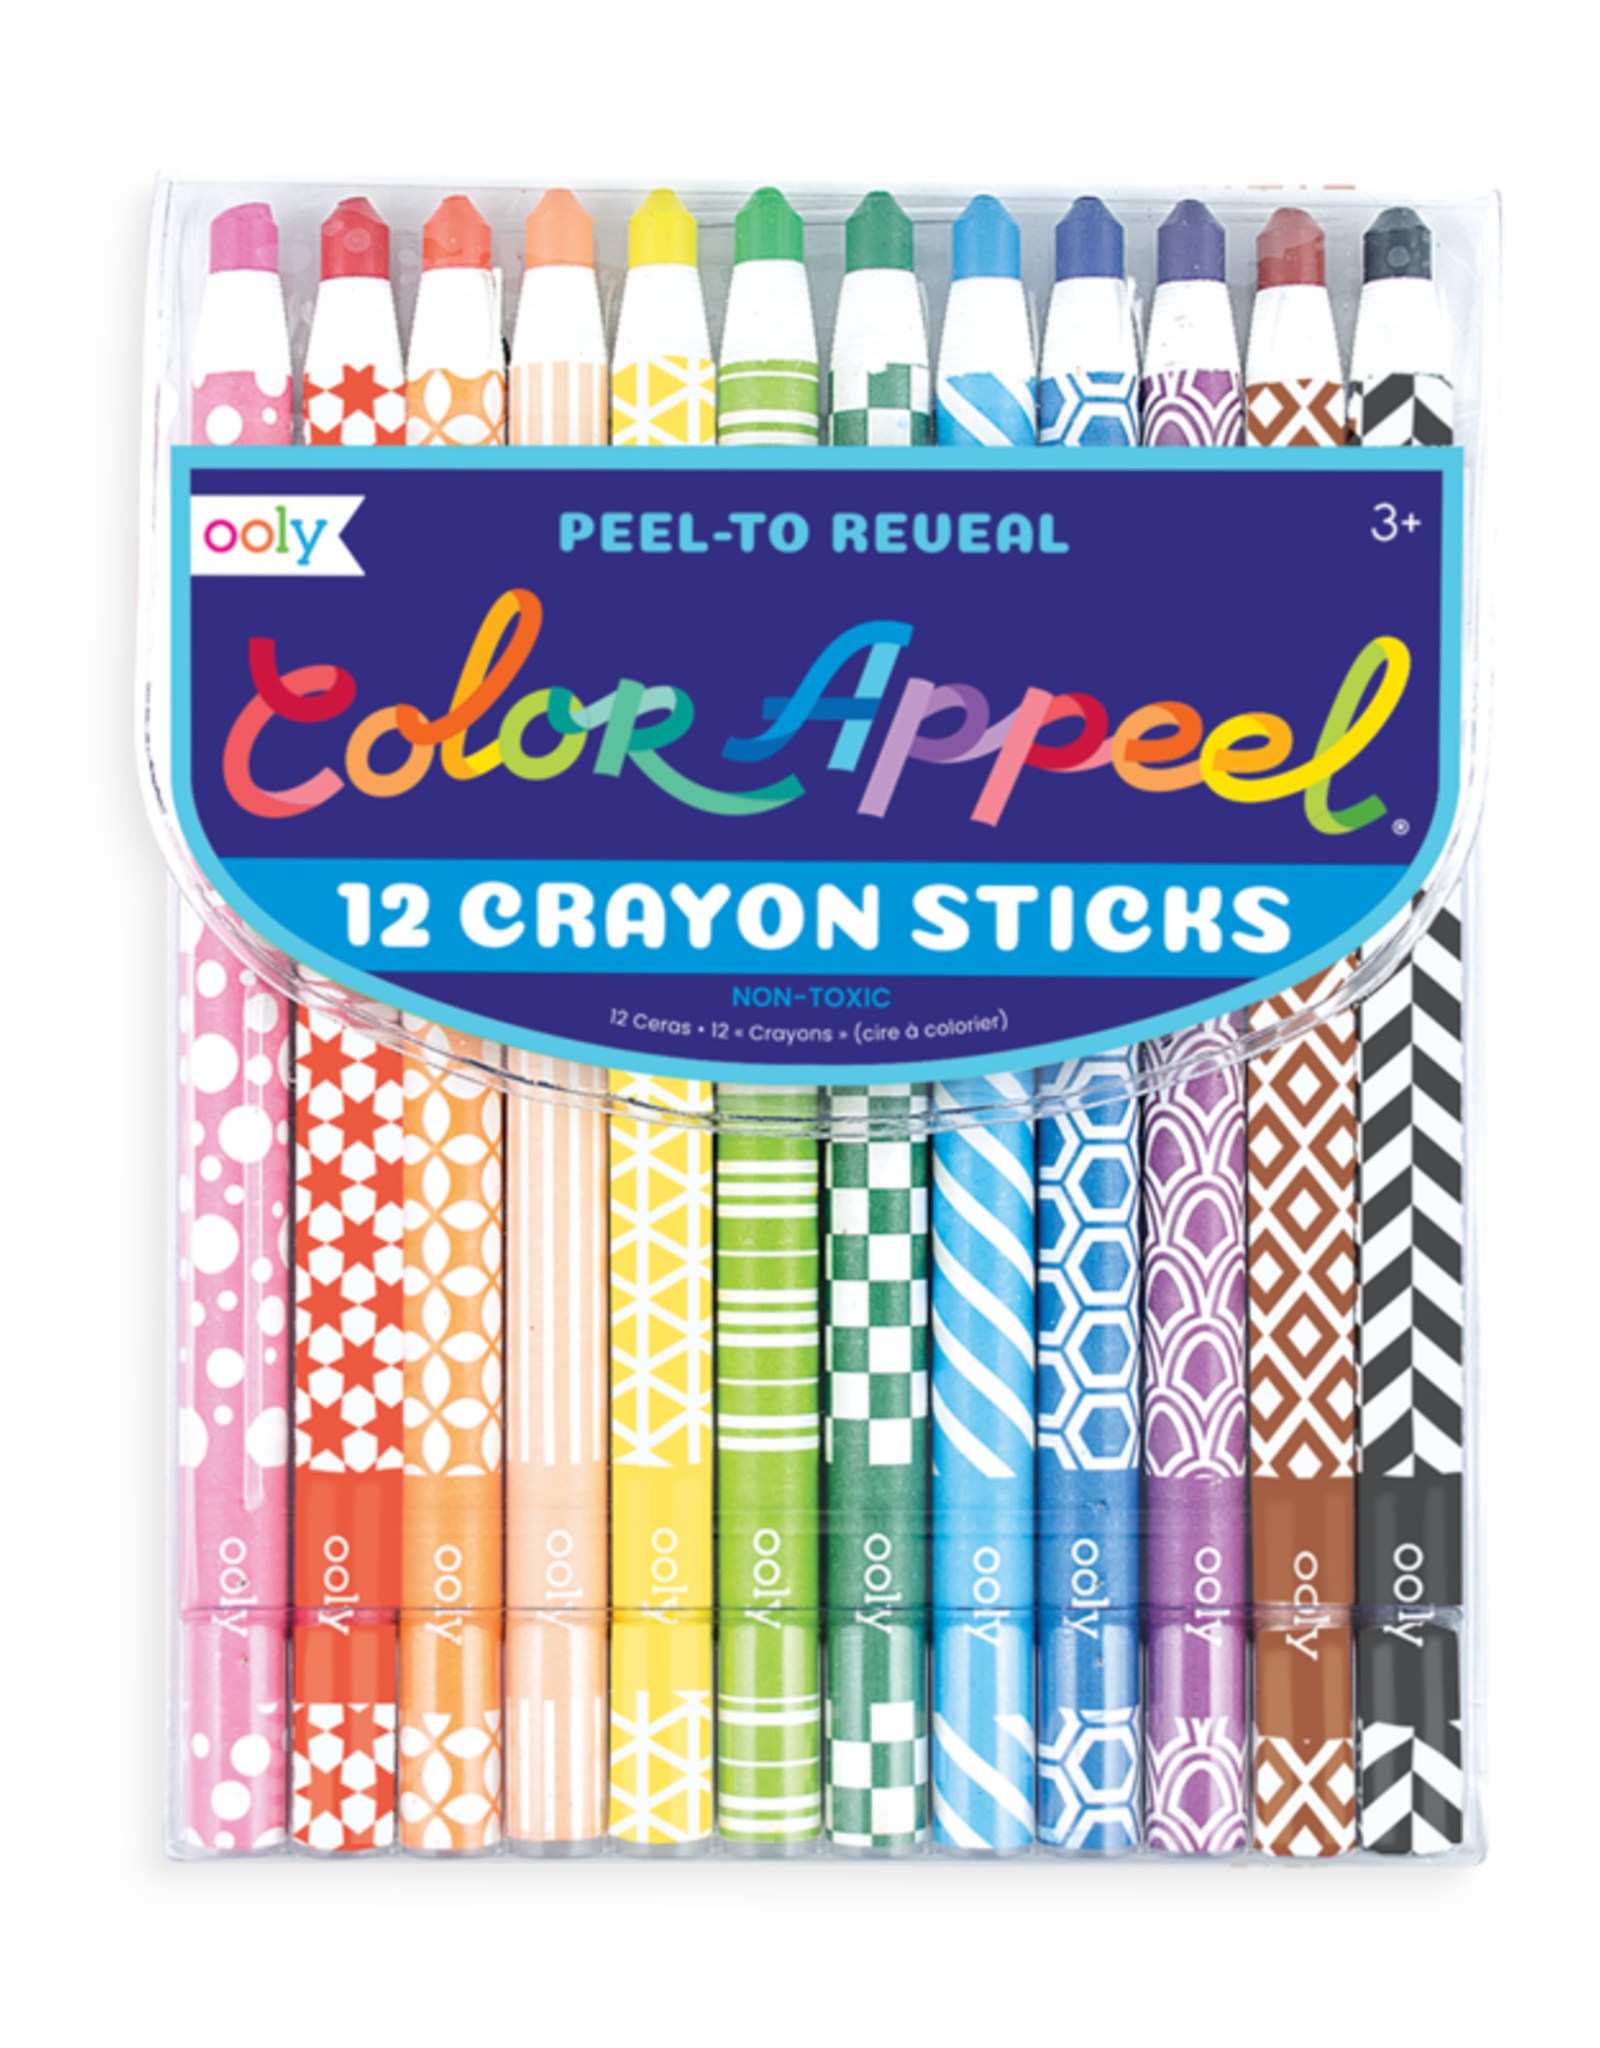 OOLY COLOR APPEEL CRAYONS - SET OF 12